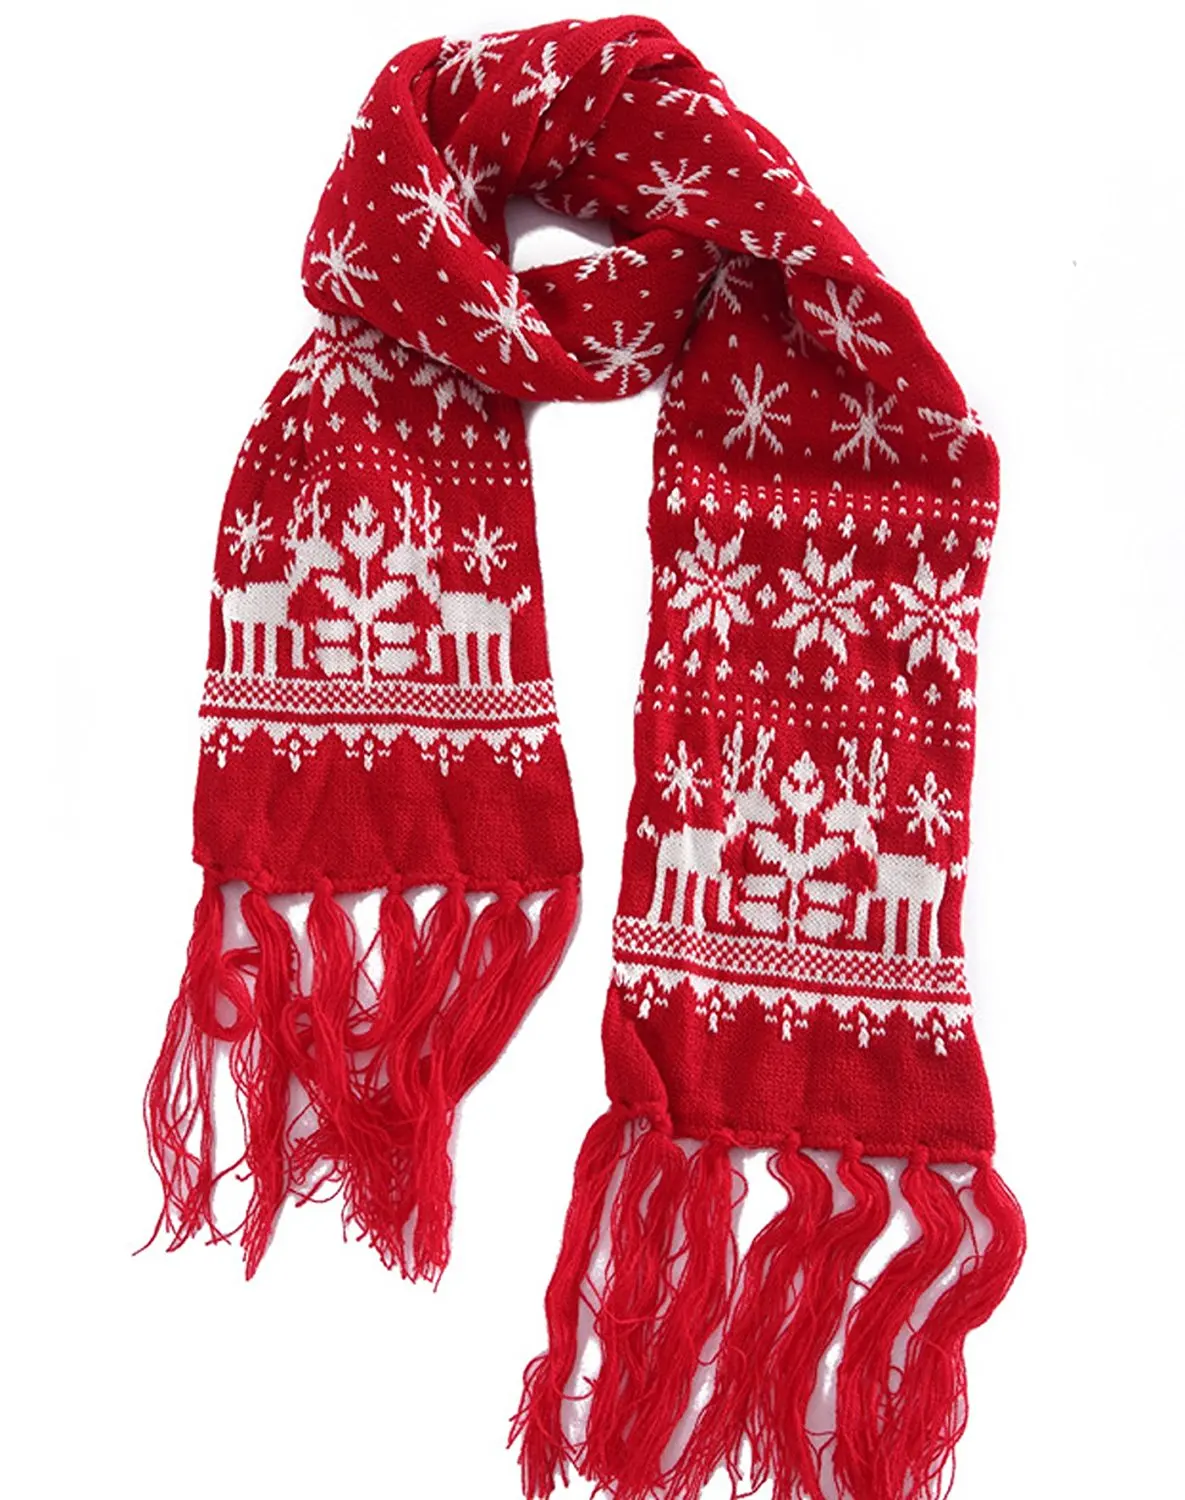 Cheap Knit Christmas Scarf, find Knit Christmas Scarf deals on line at